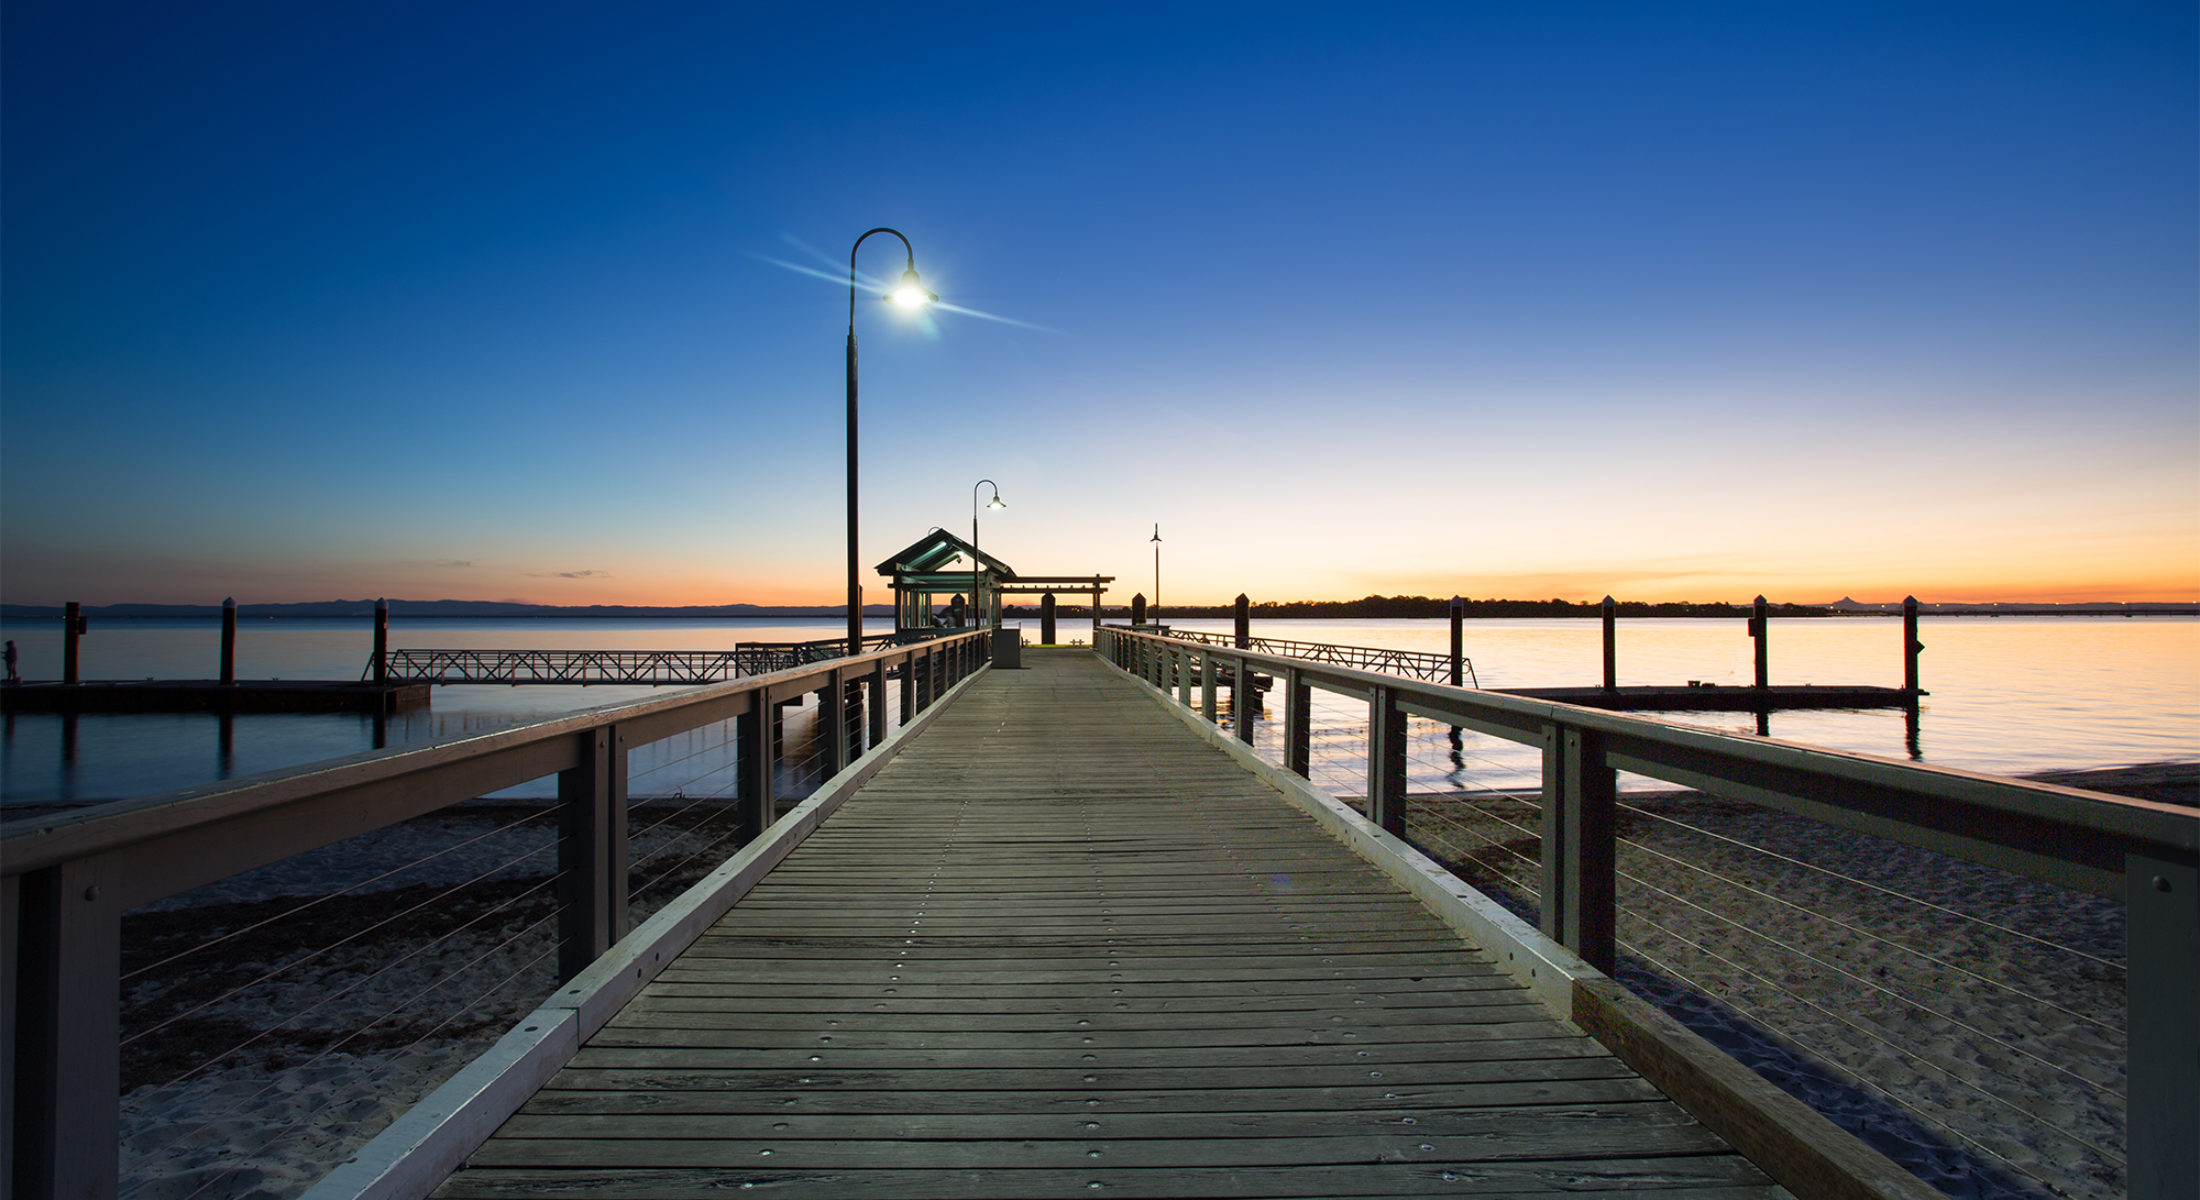 Bongaree Jetty on Bribie Island is accessible and a good spot for fishing